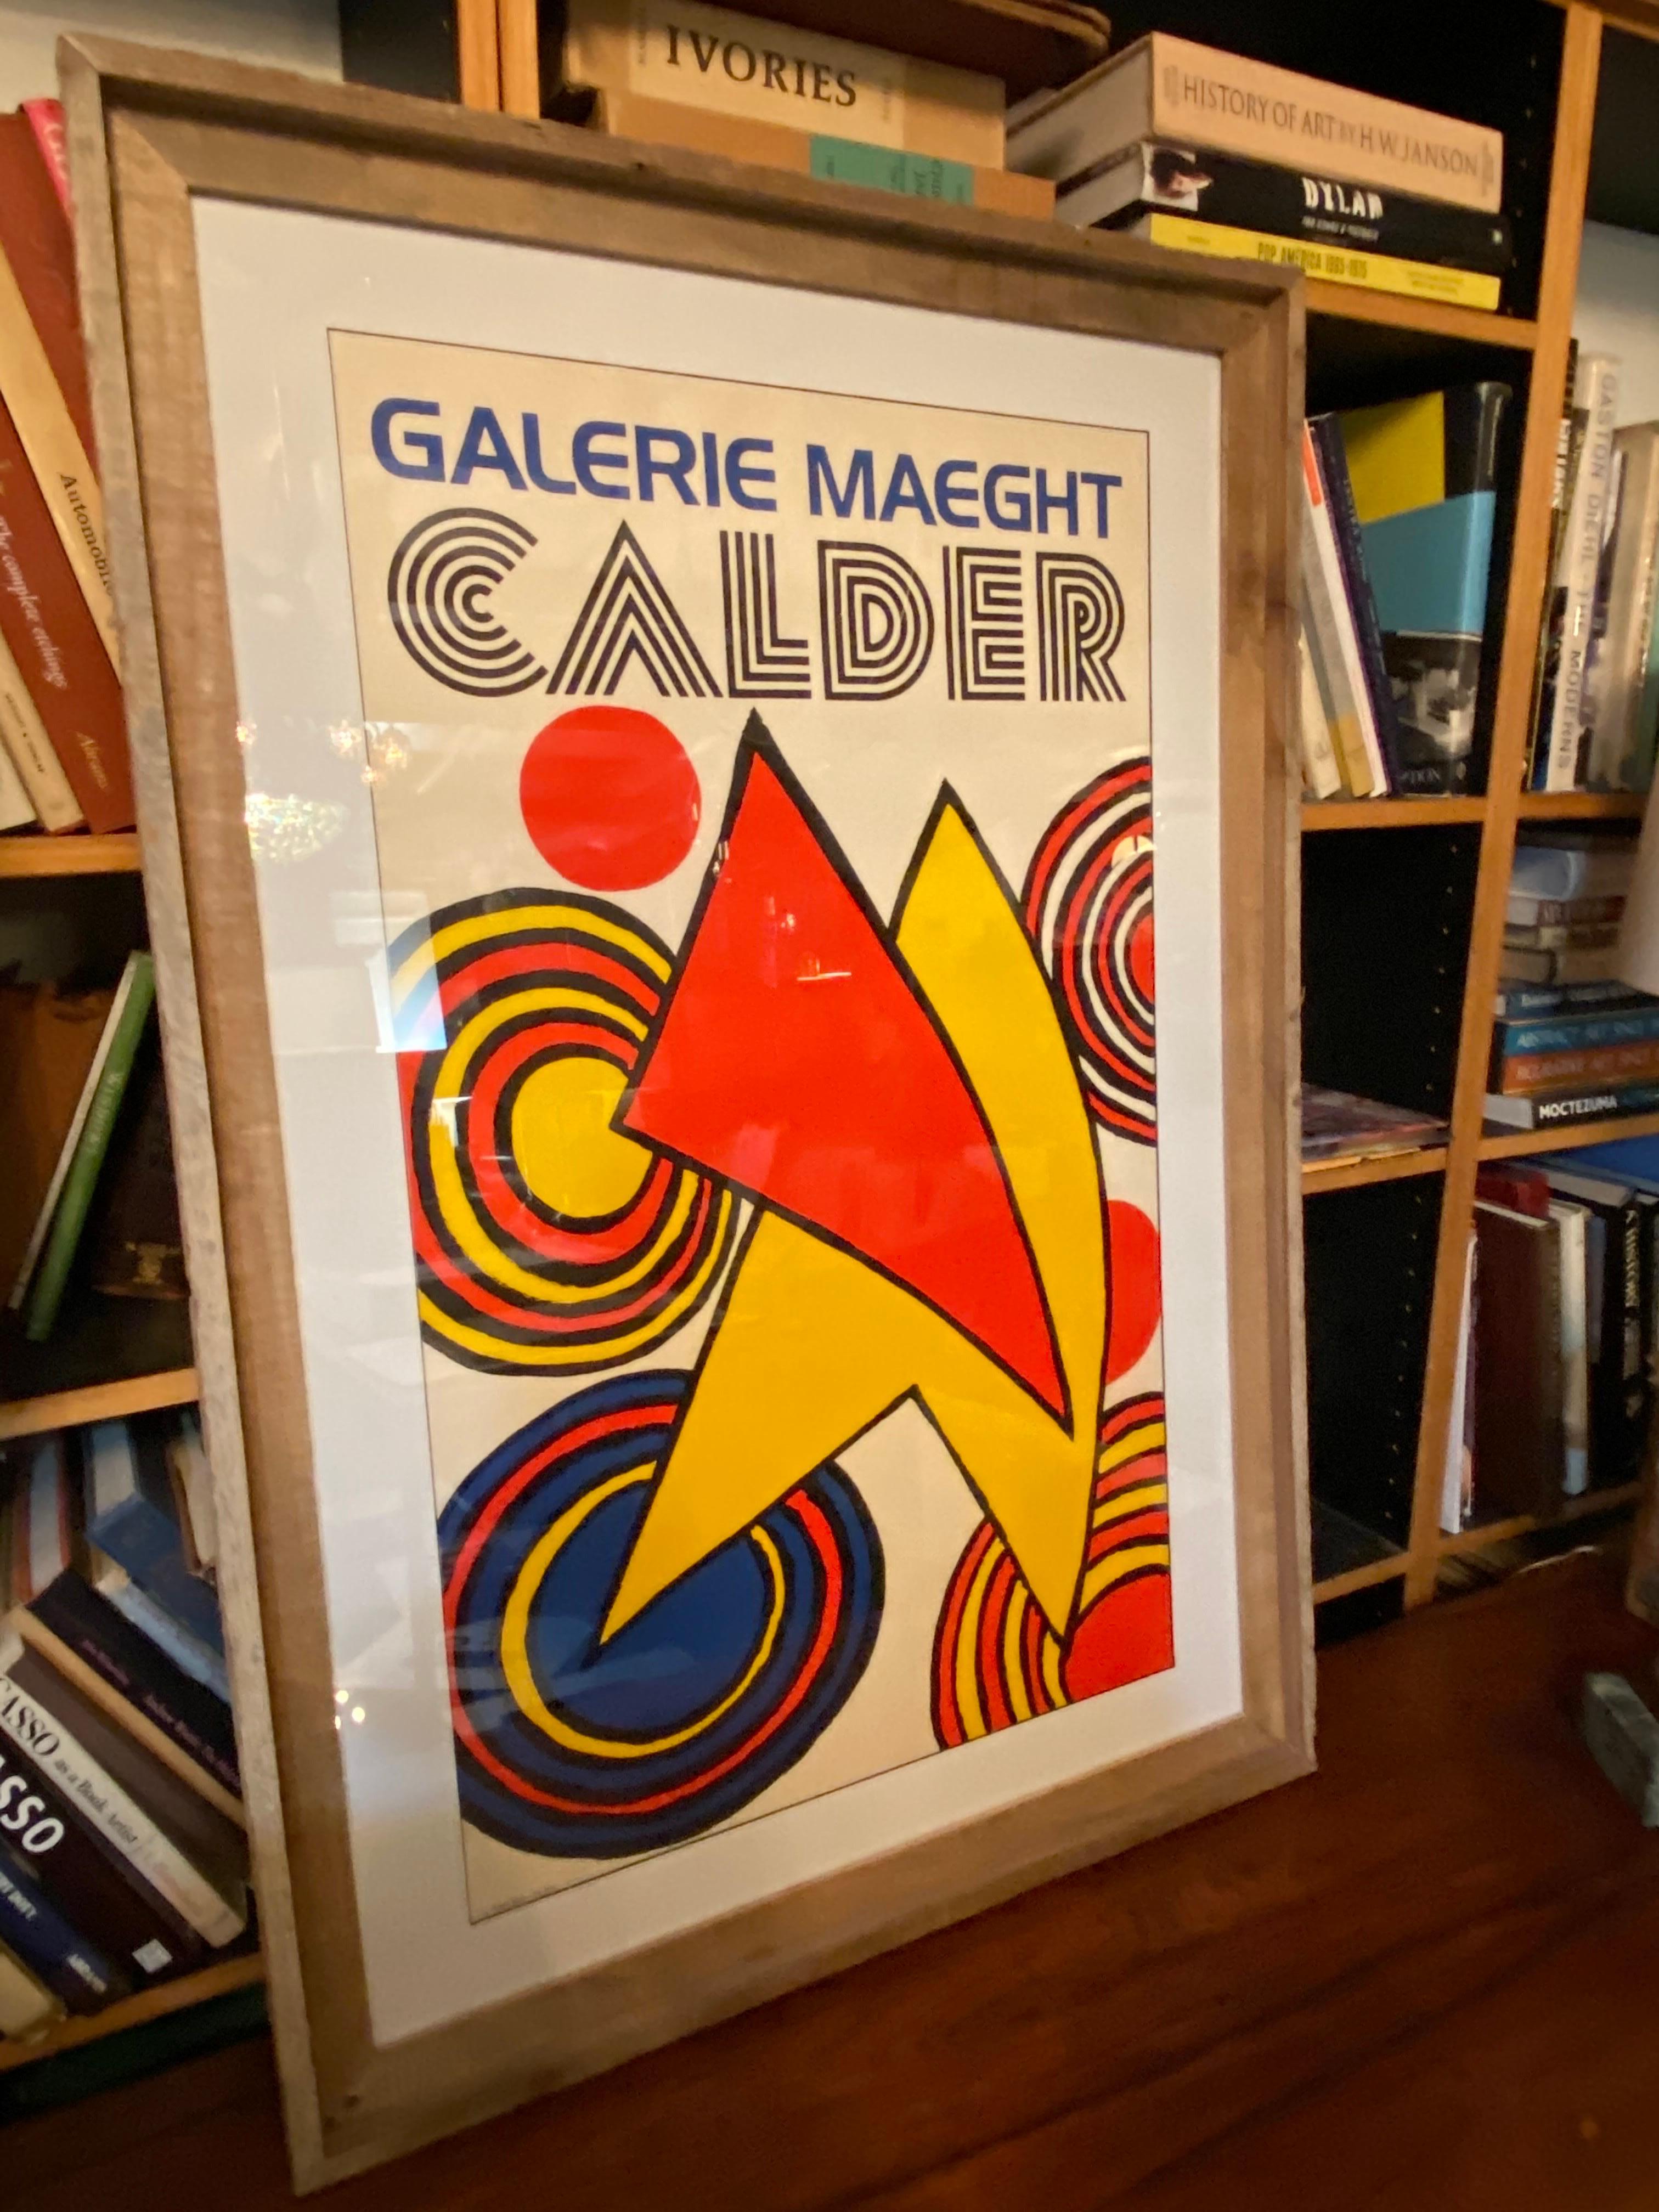 French Alexander Calder Galerie Maeght Framed Exhibition Poster, Limited Edition, 1970